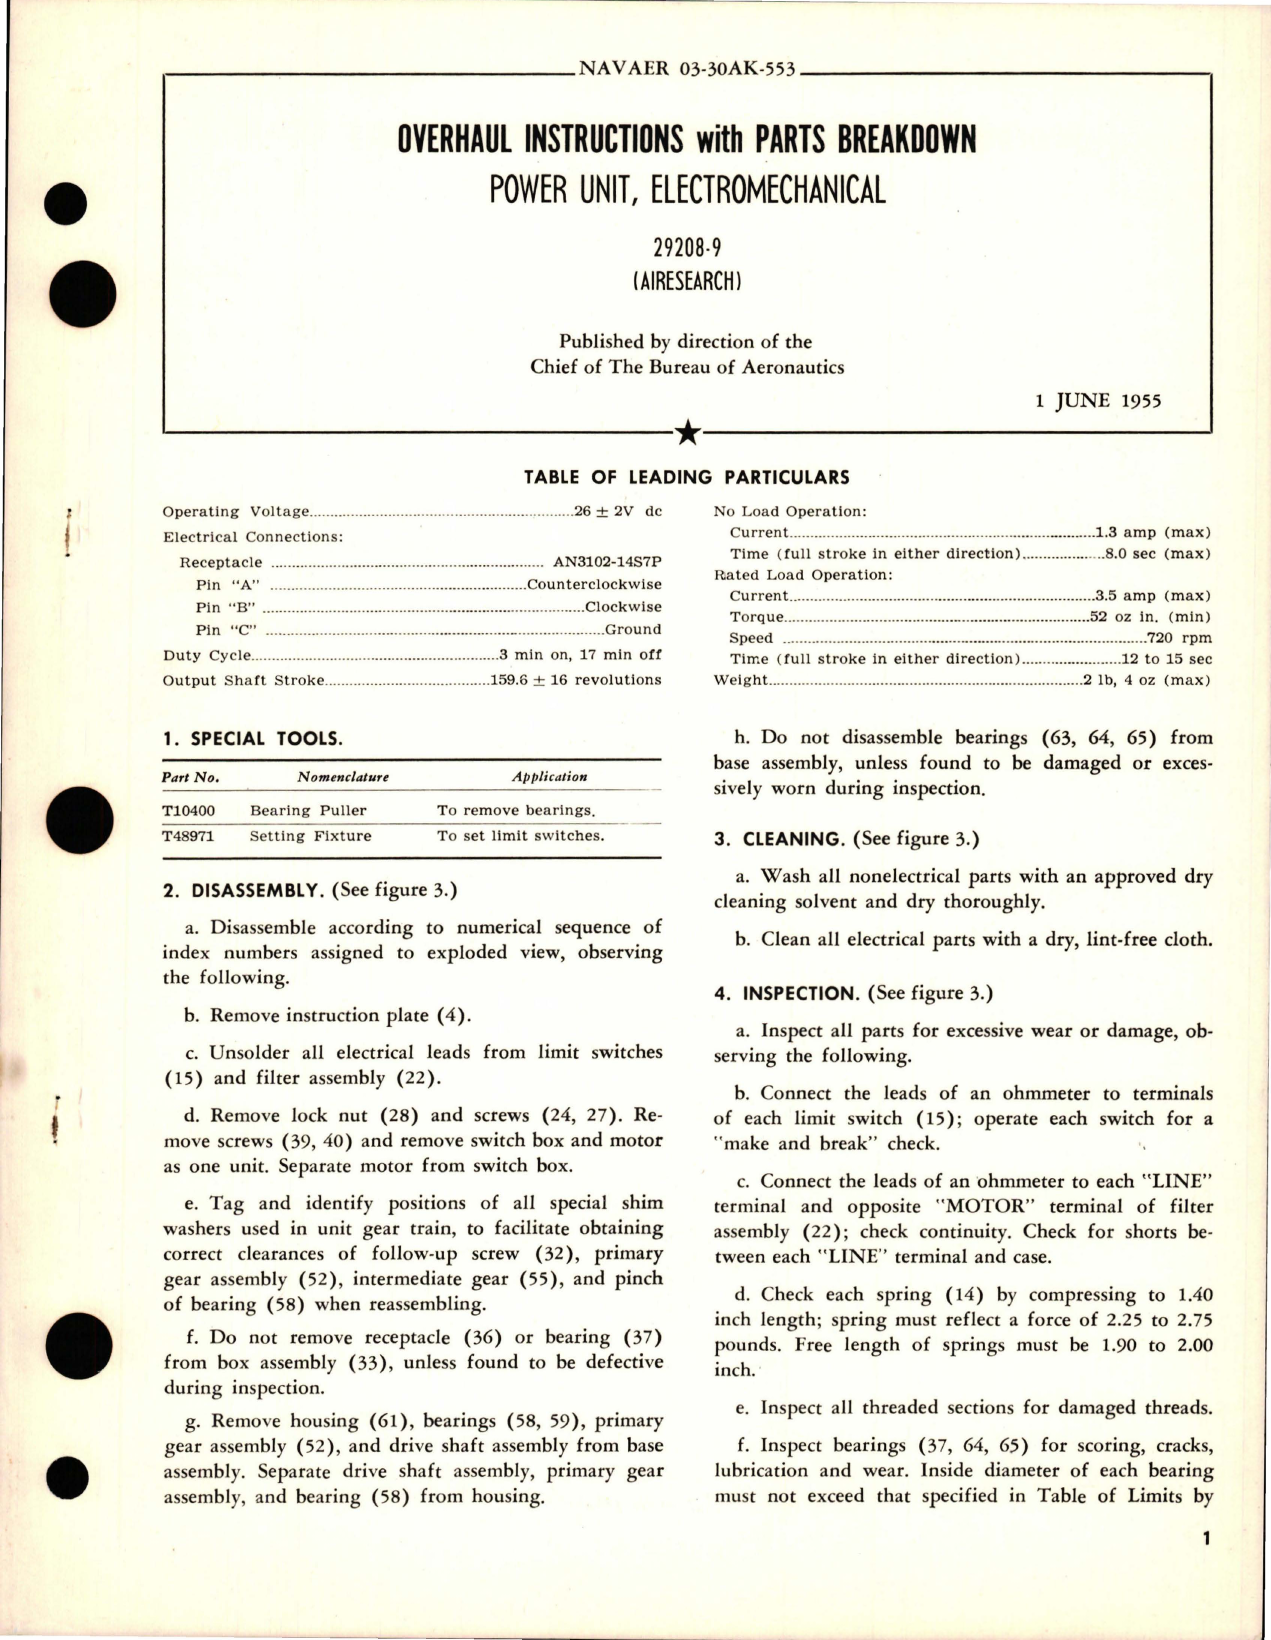 Sample page 1 from AirCorps Library document: Overhaul Instructions with Parts Breakdown for Electromechanical Power Unit - 29208-9 